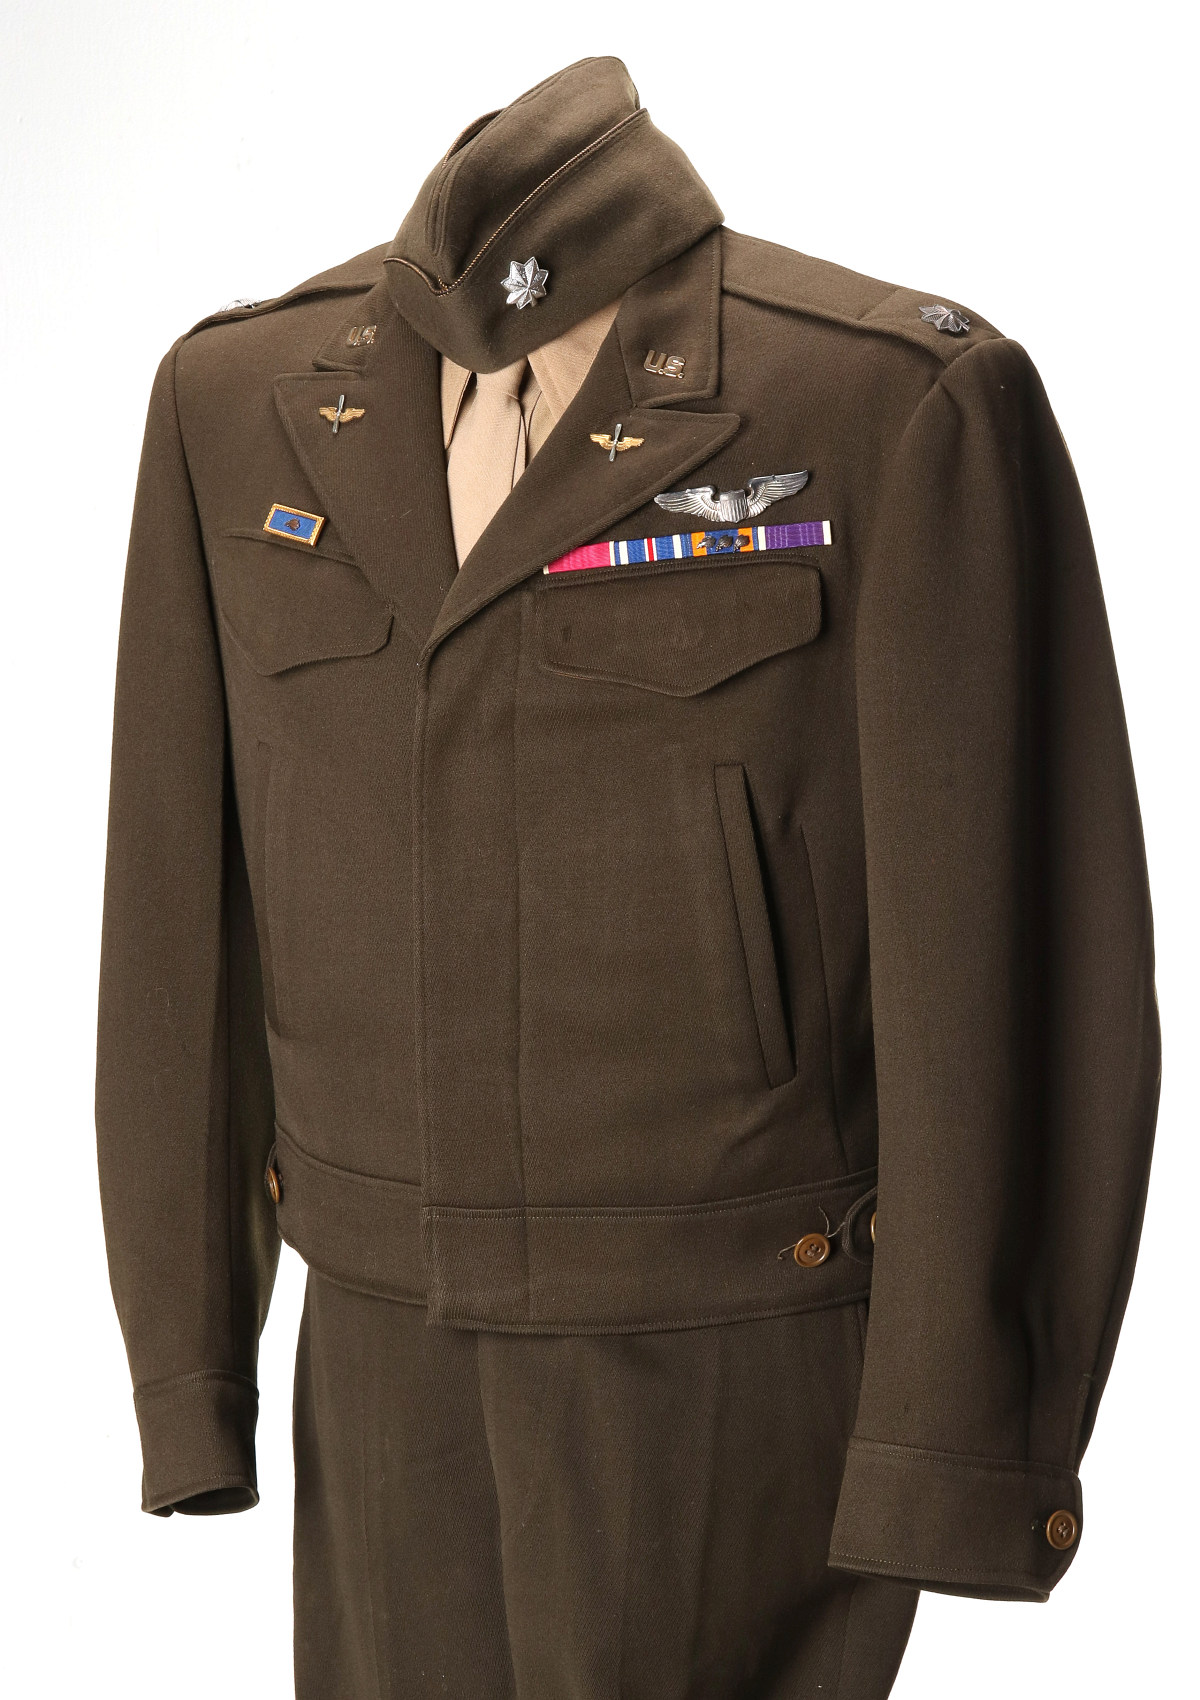 WWII OFFICER'S B-2 JACKET WITH BULLION AND WINGS